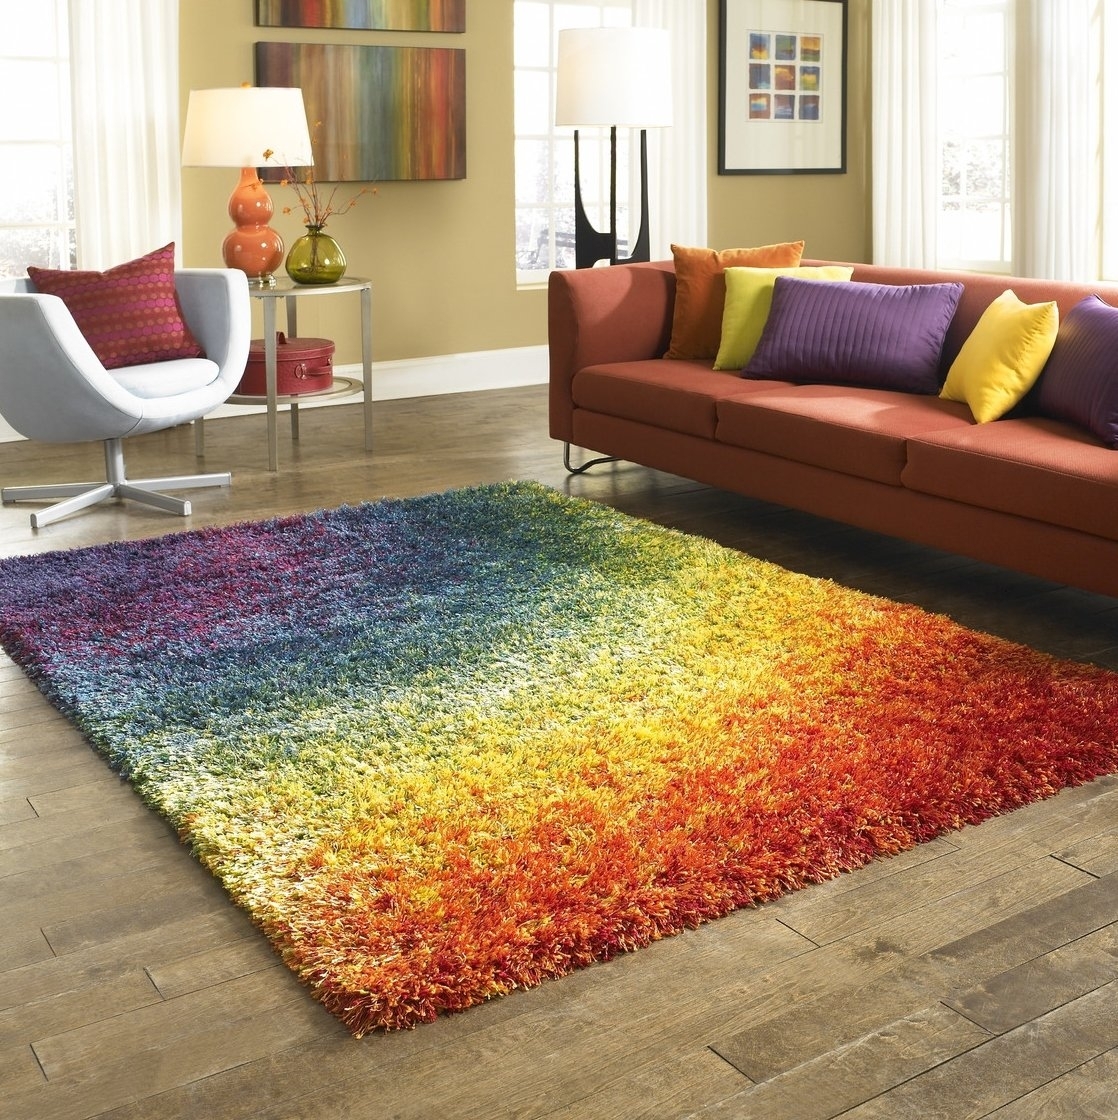 How to become healthier with the use of small rugs?